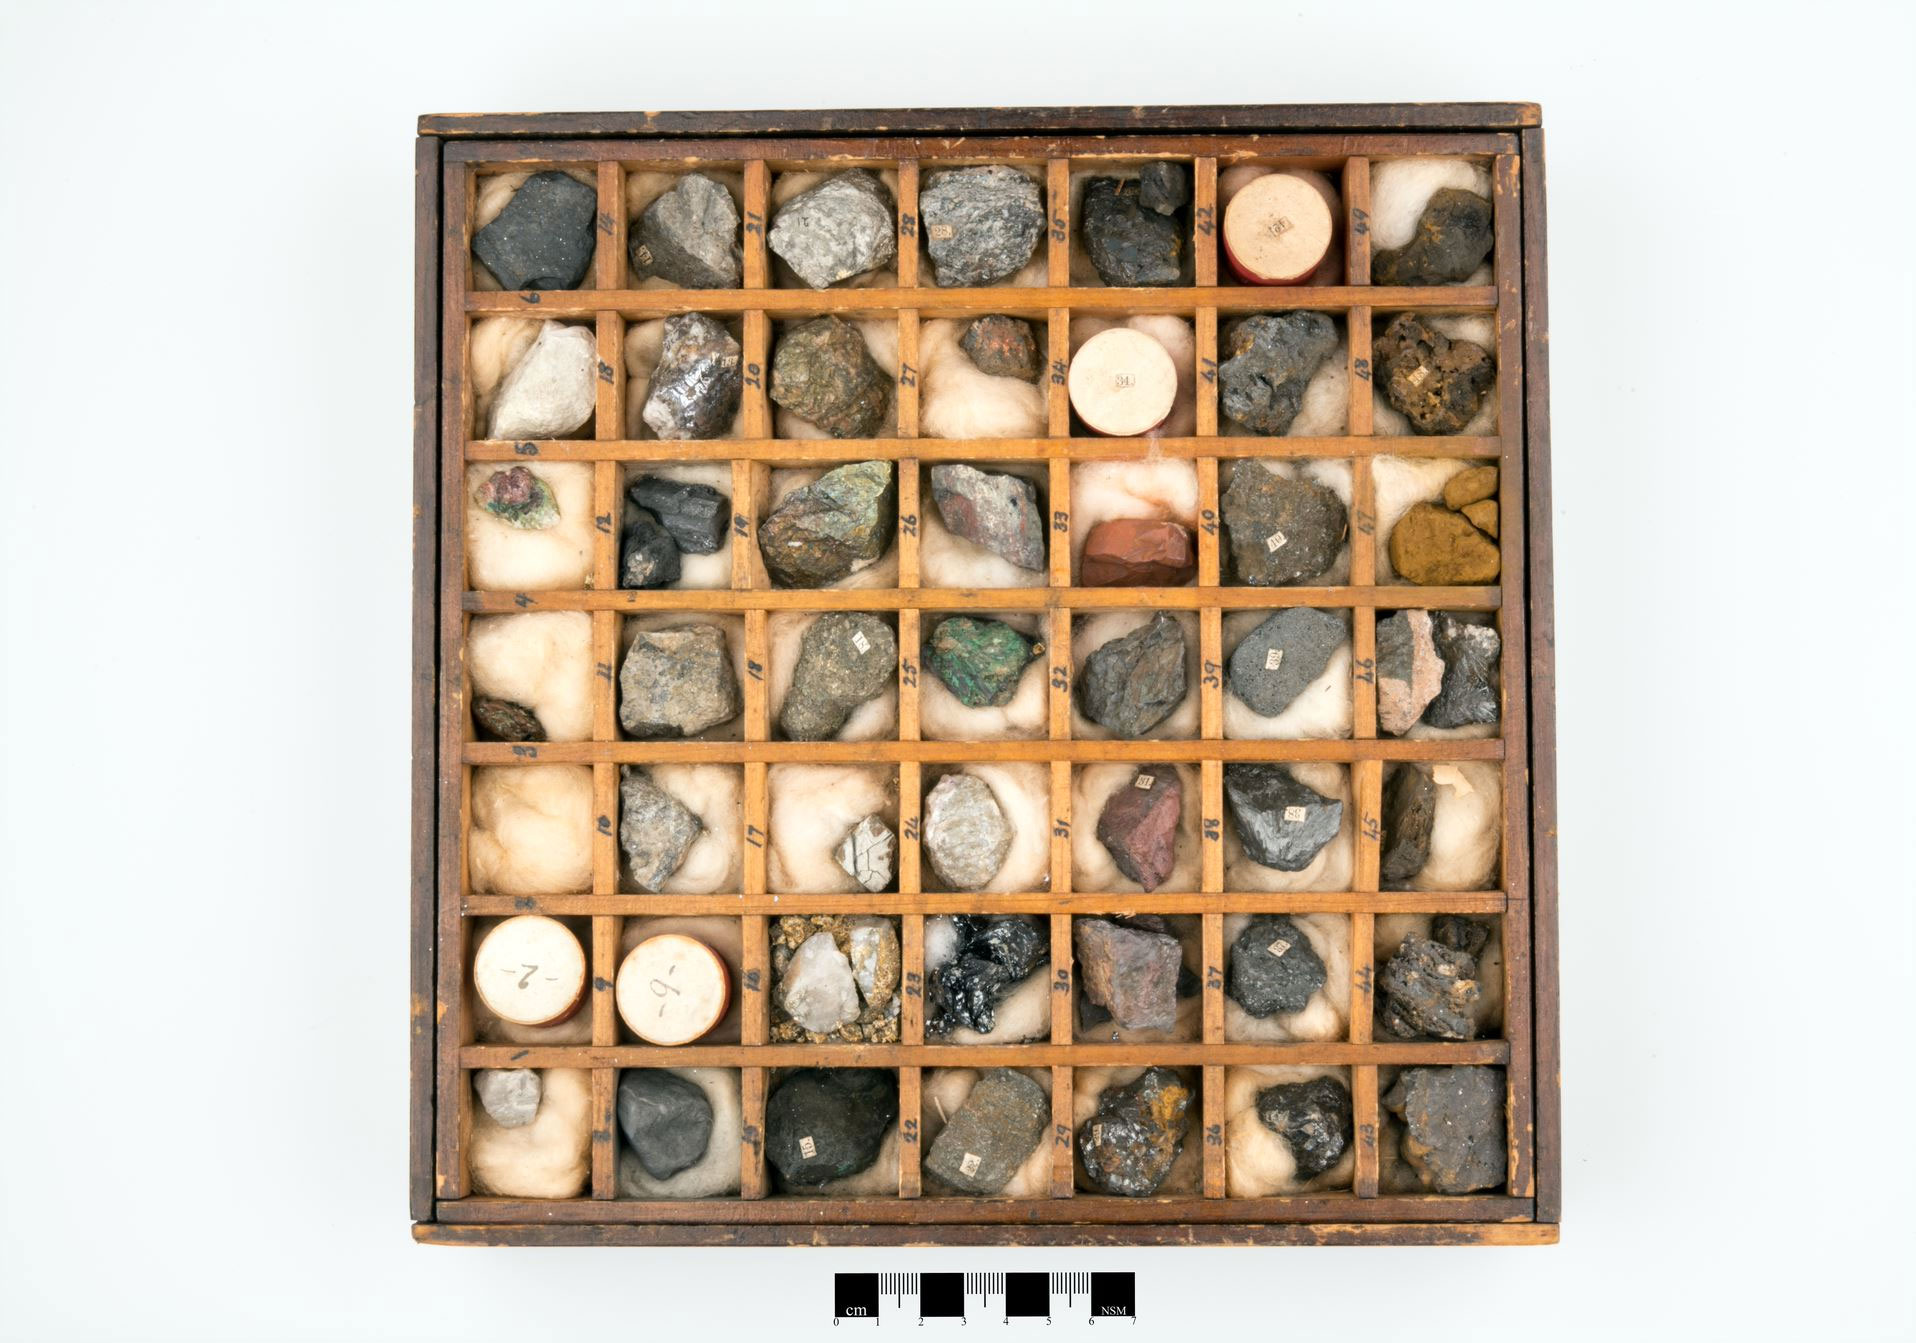 Collection of rocks and minerals